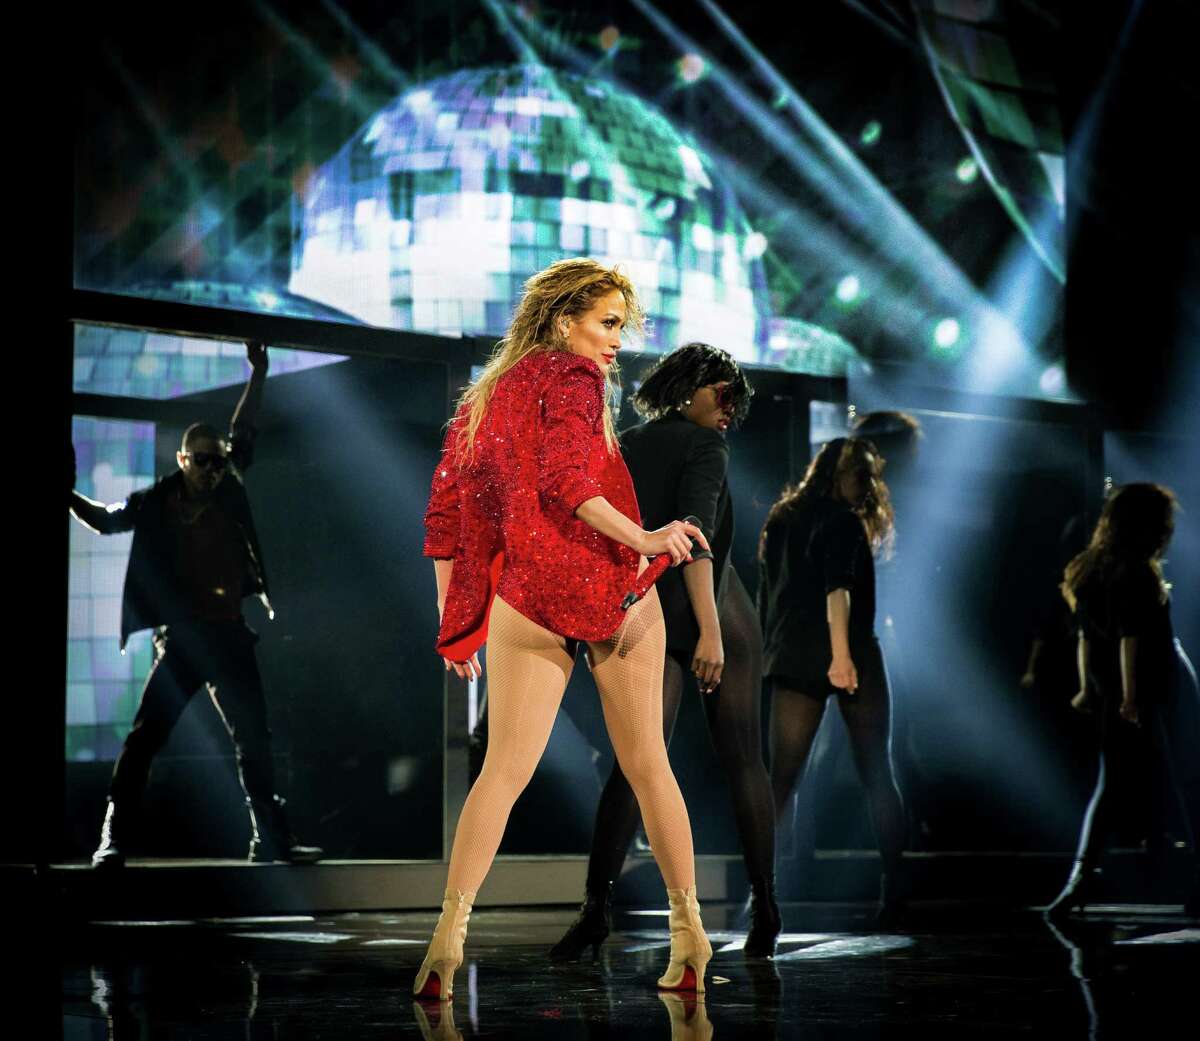 Jennifer Lopez performs her "Booty!" song onstage at the 2014 American Music Awards in November.